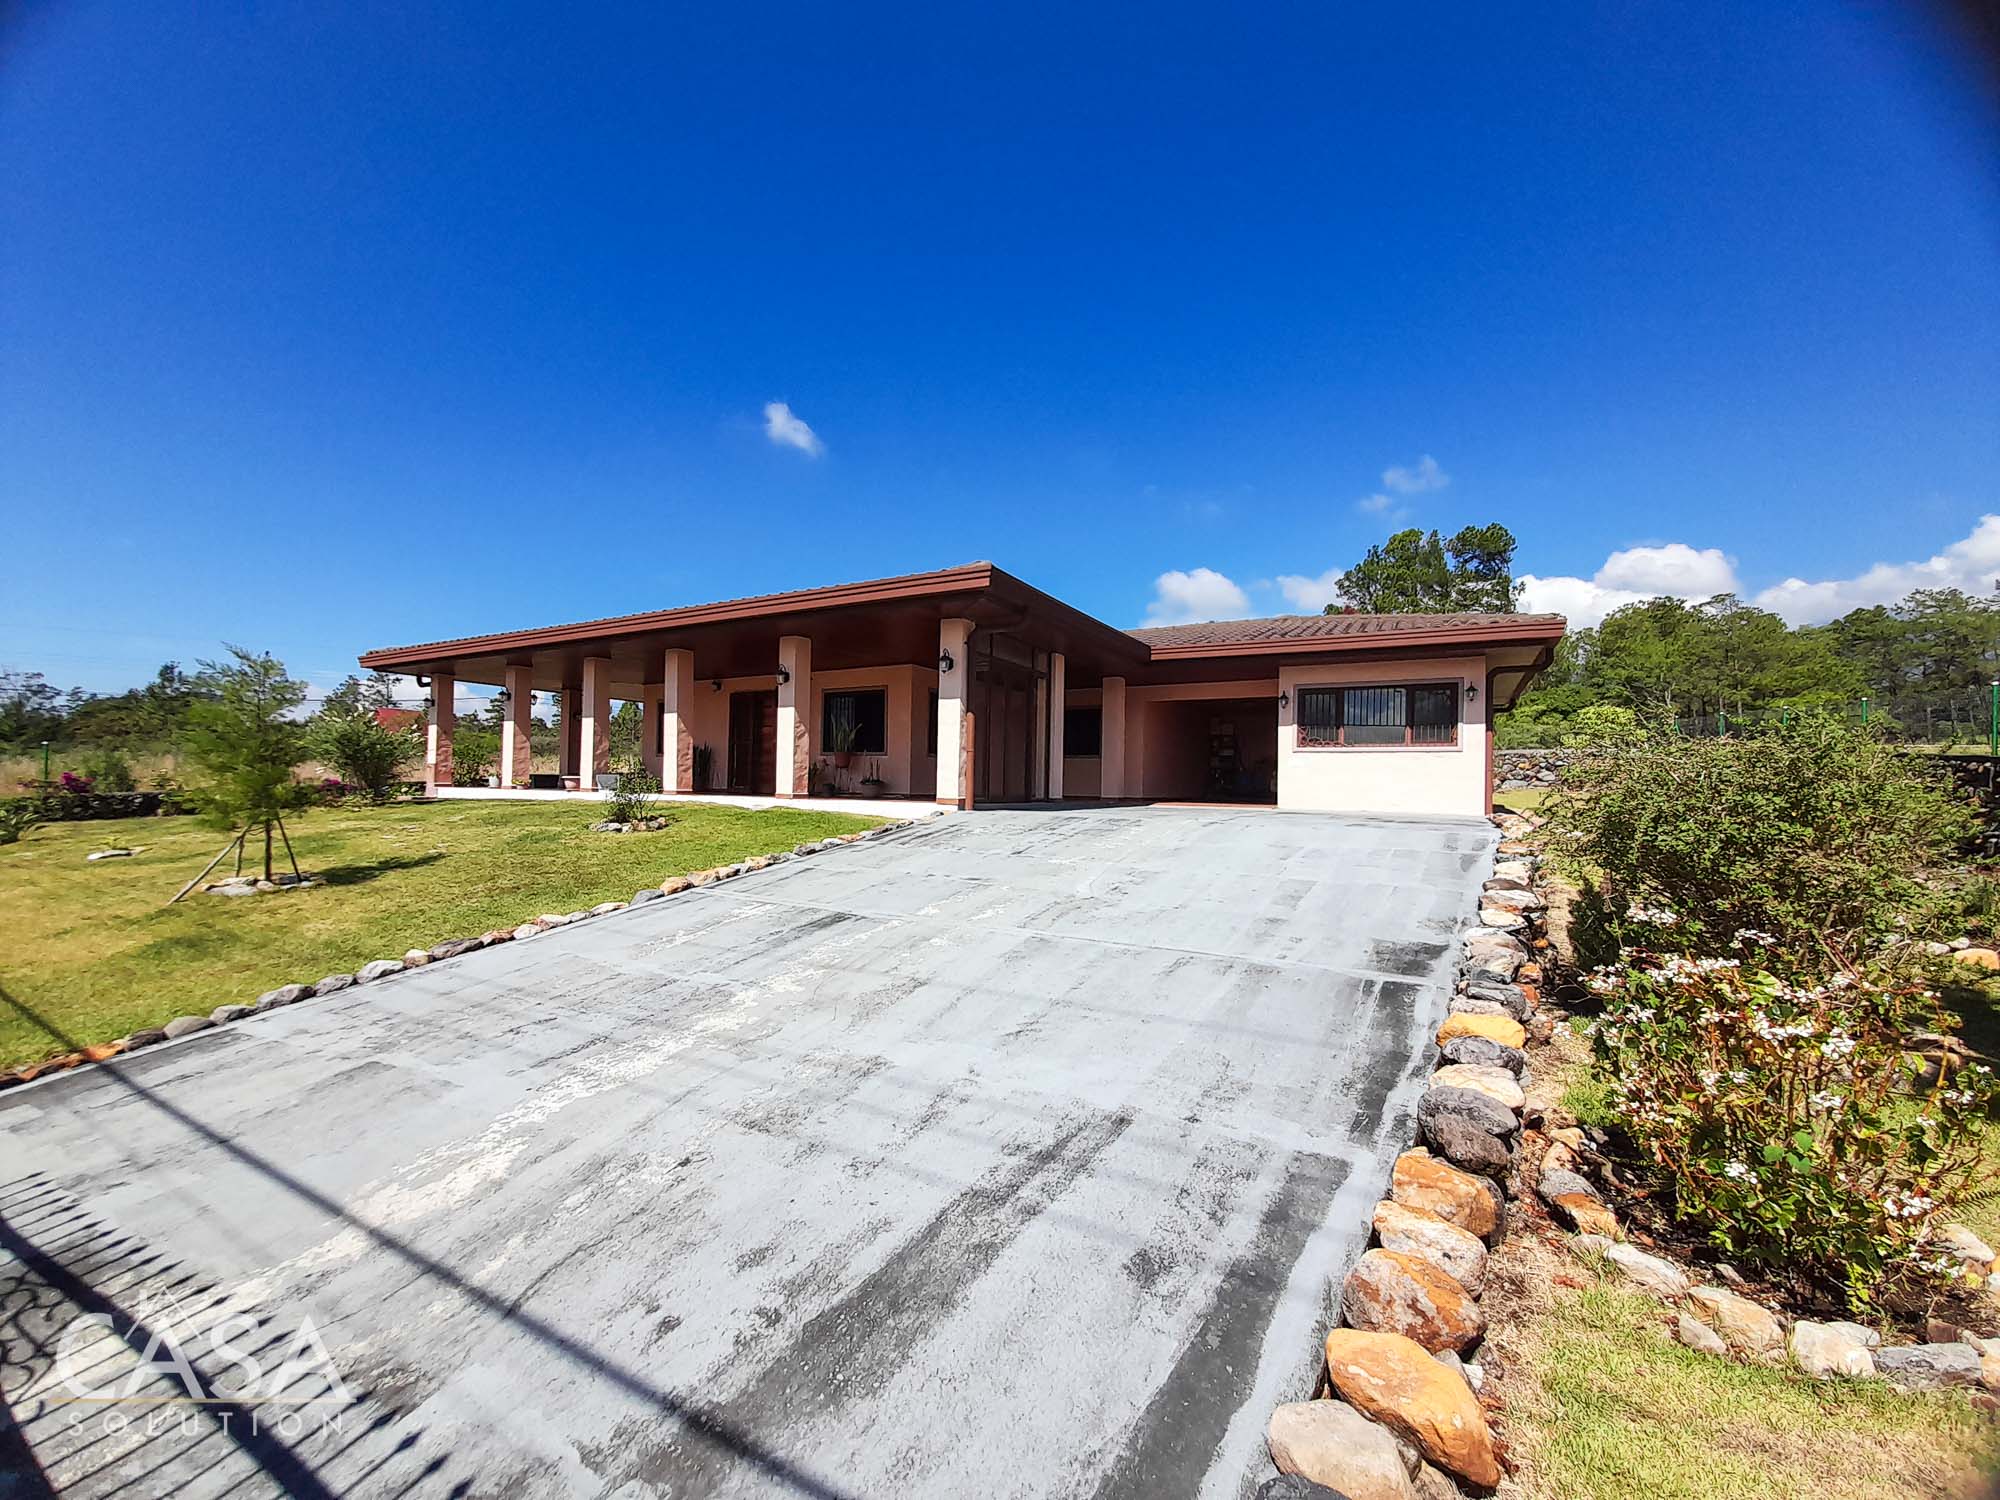 3-Bedroom Home for Sale in Alto Boquete with Great Mountain Views. Fully Furnished, and Conveniently Located just 3 Minutes from Downtown Boquete